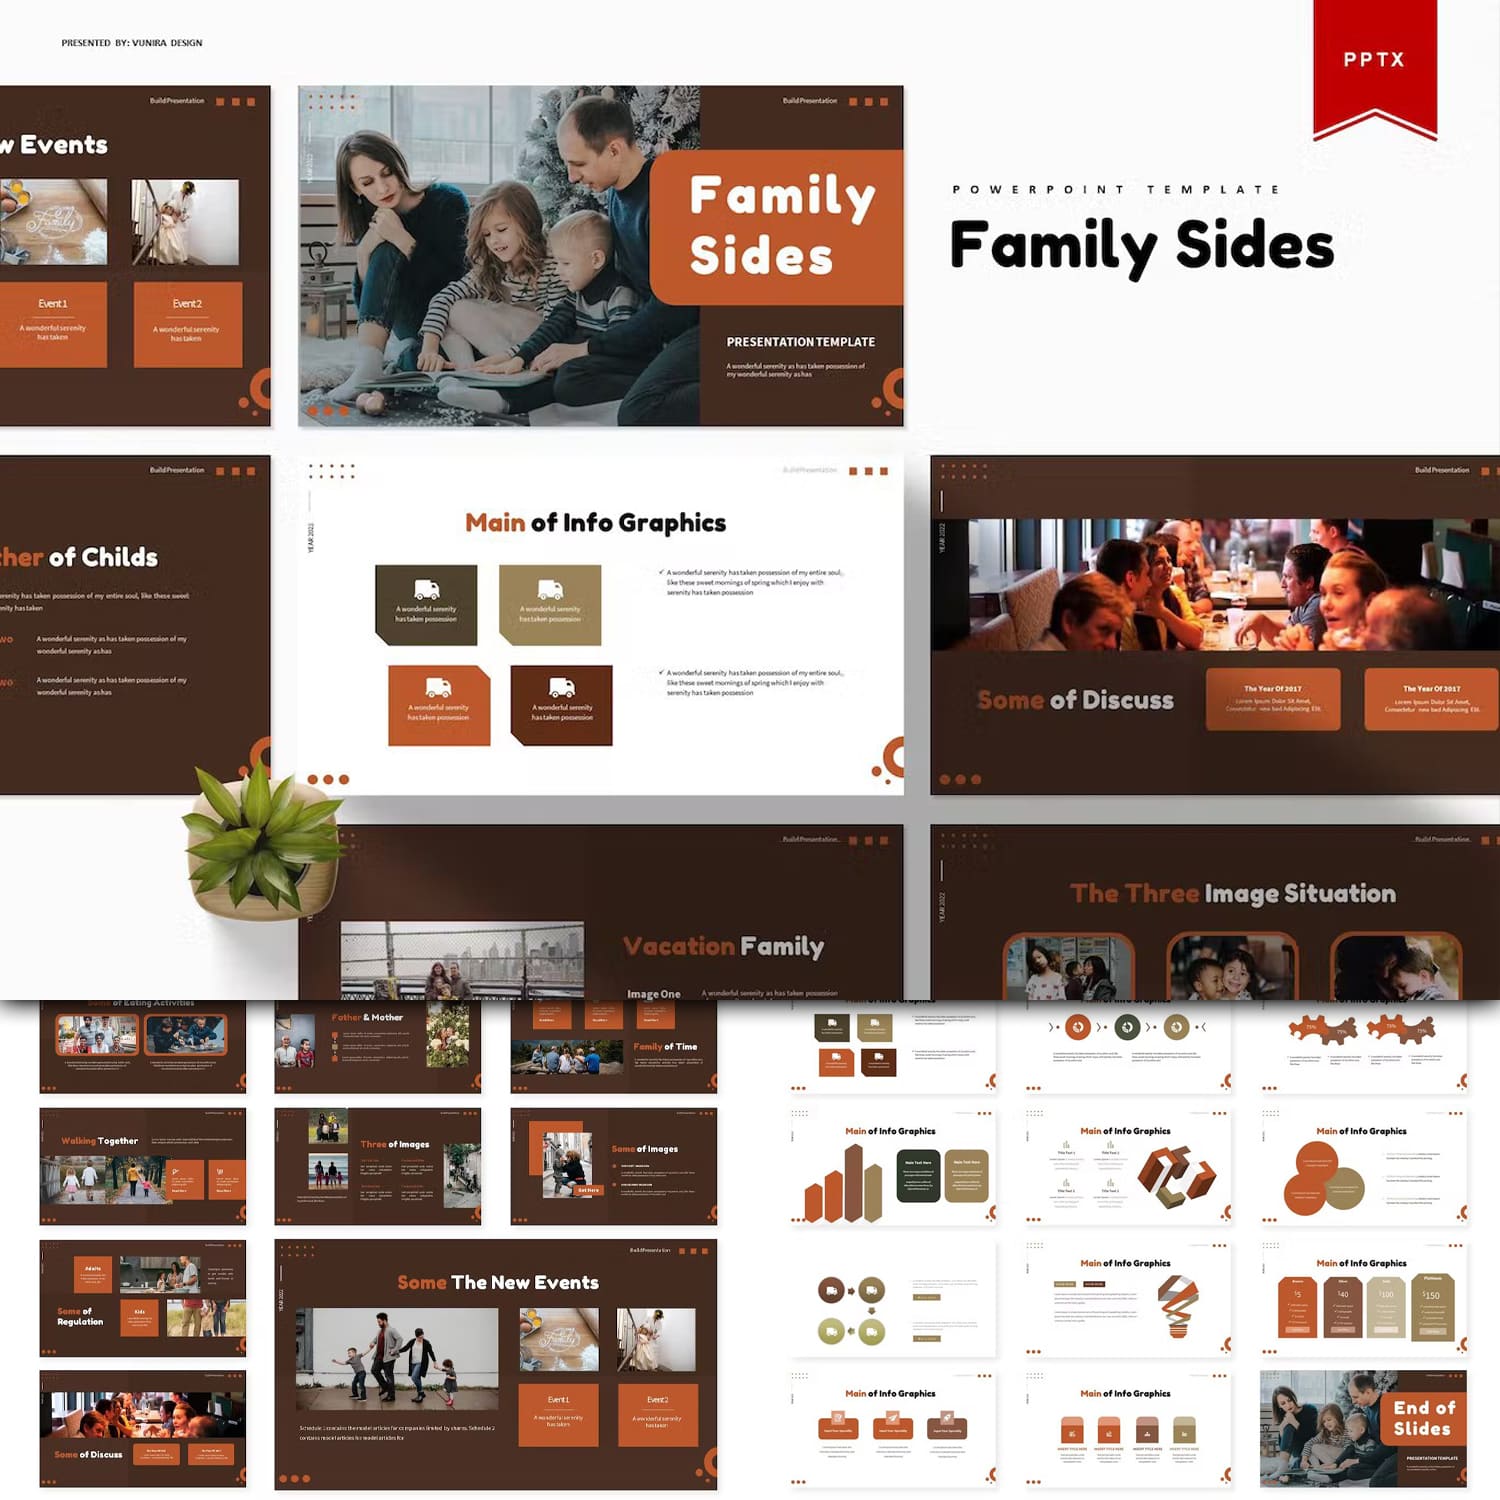 Familly sides powerpoint template - main image preview.